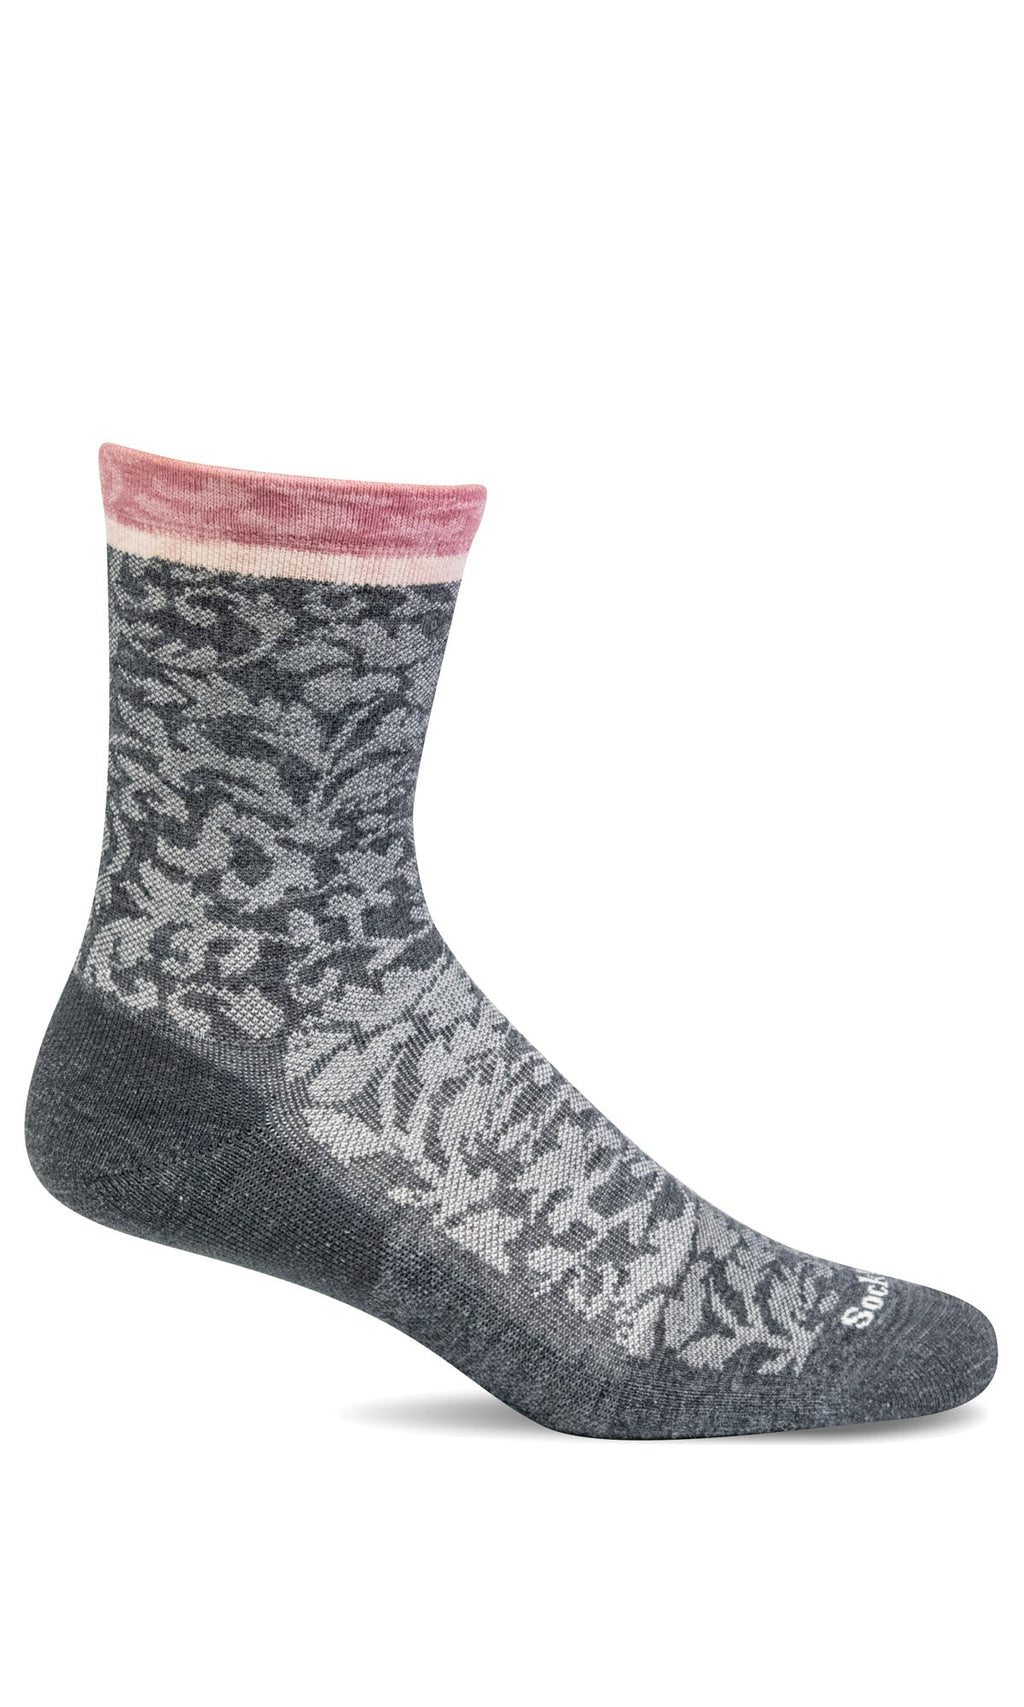 Sockwell Canada  Official Sockwell Canadian Online Store